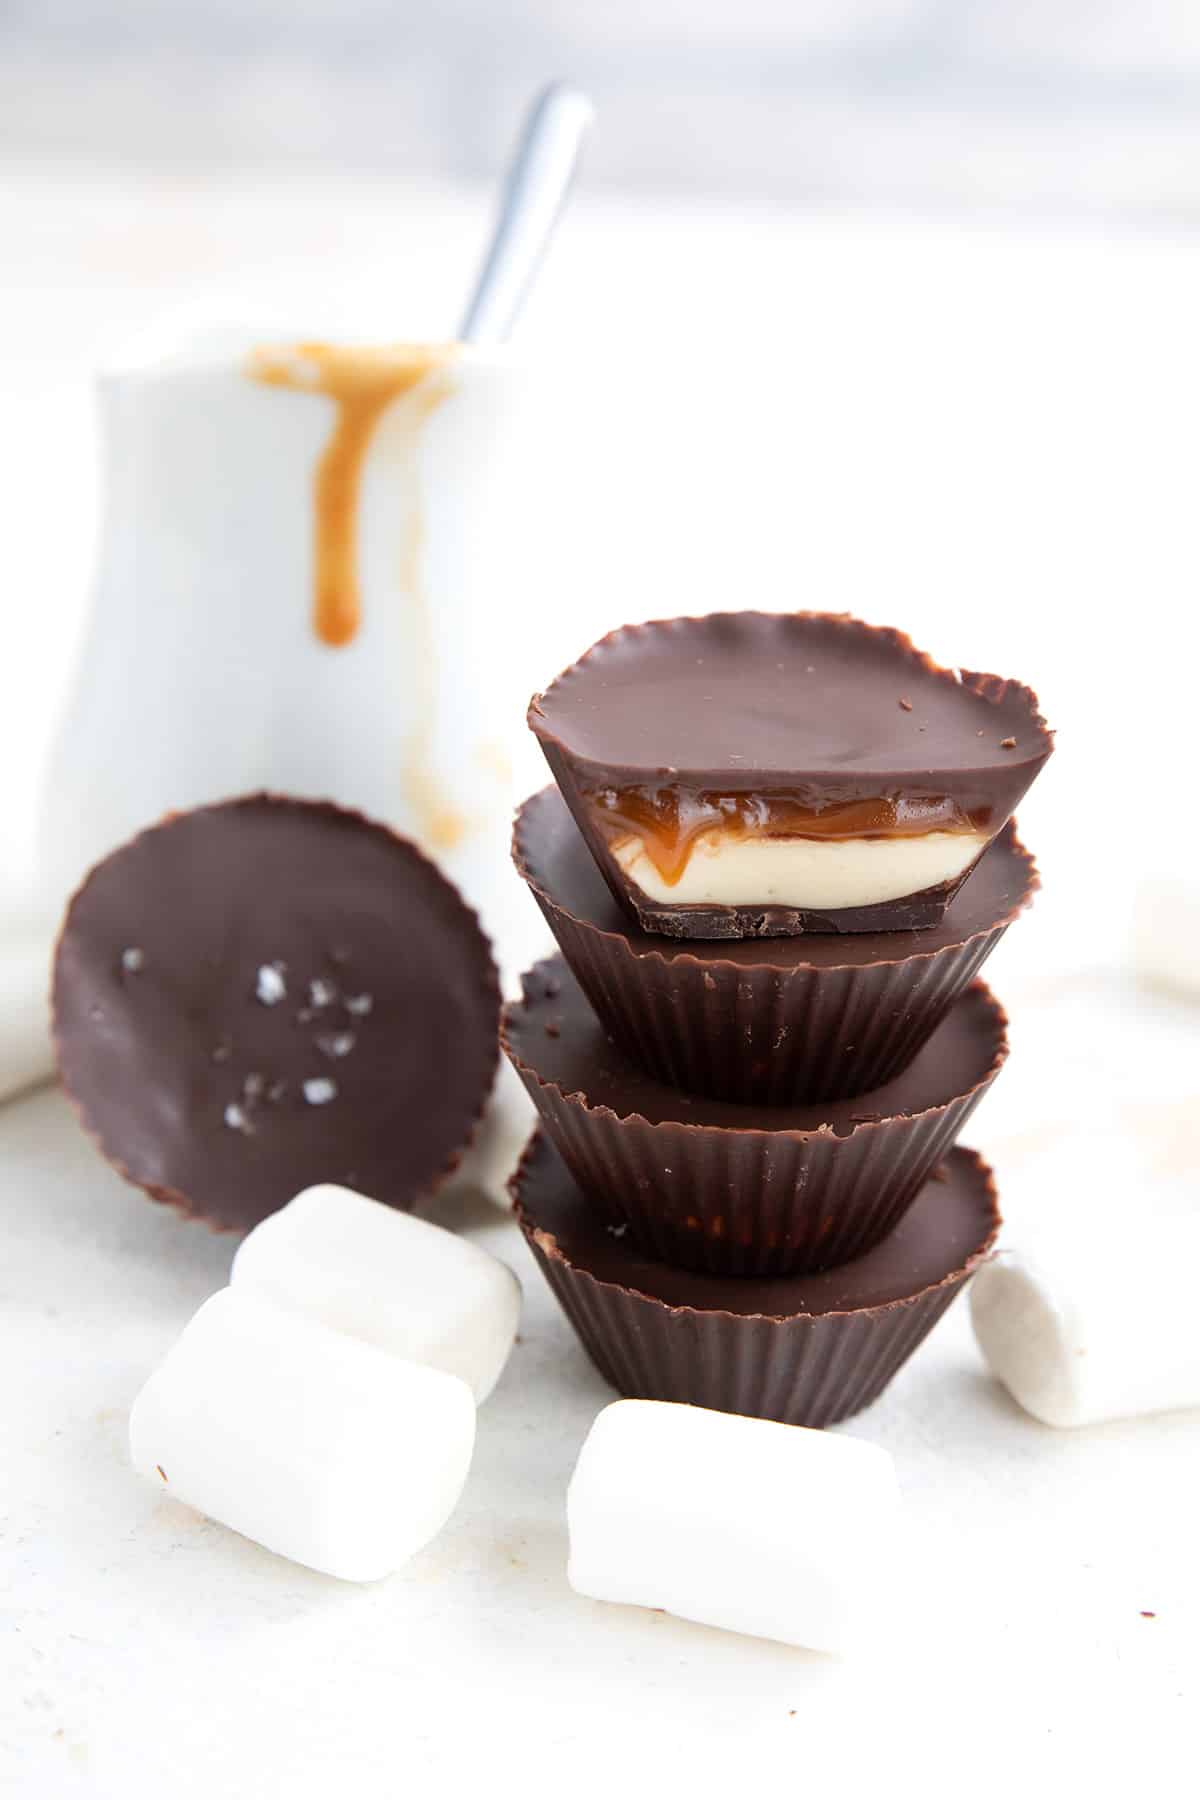 A stack of marshmallow and caramel filled Keto Cups.